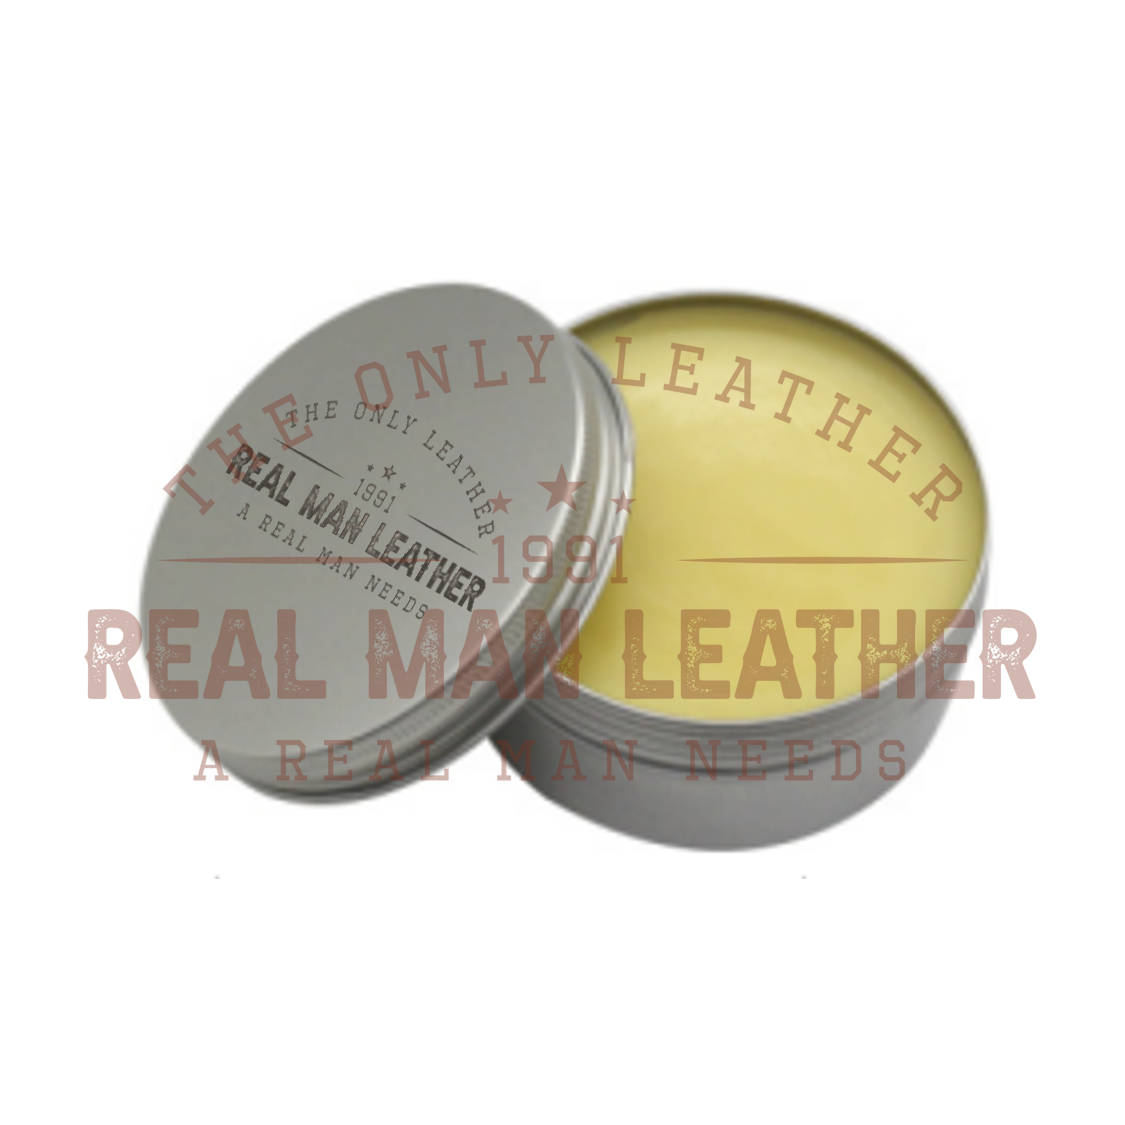 Real Man Leather© Leather Balm (3.5oz / 100g)